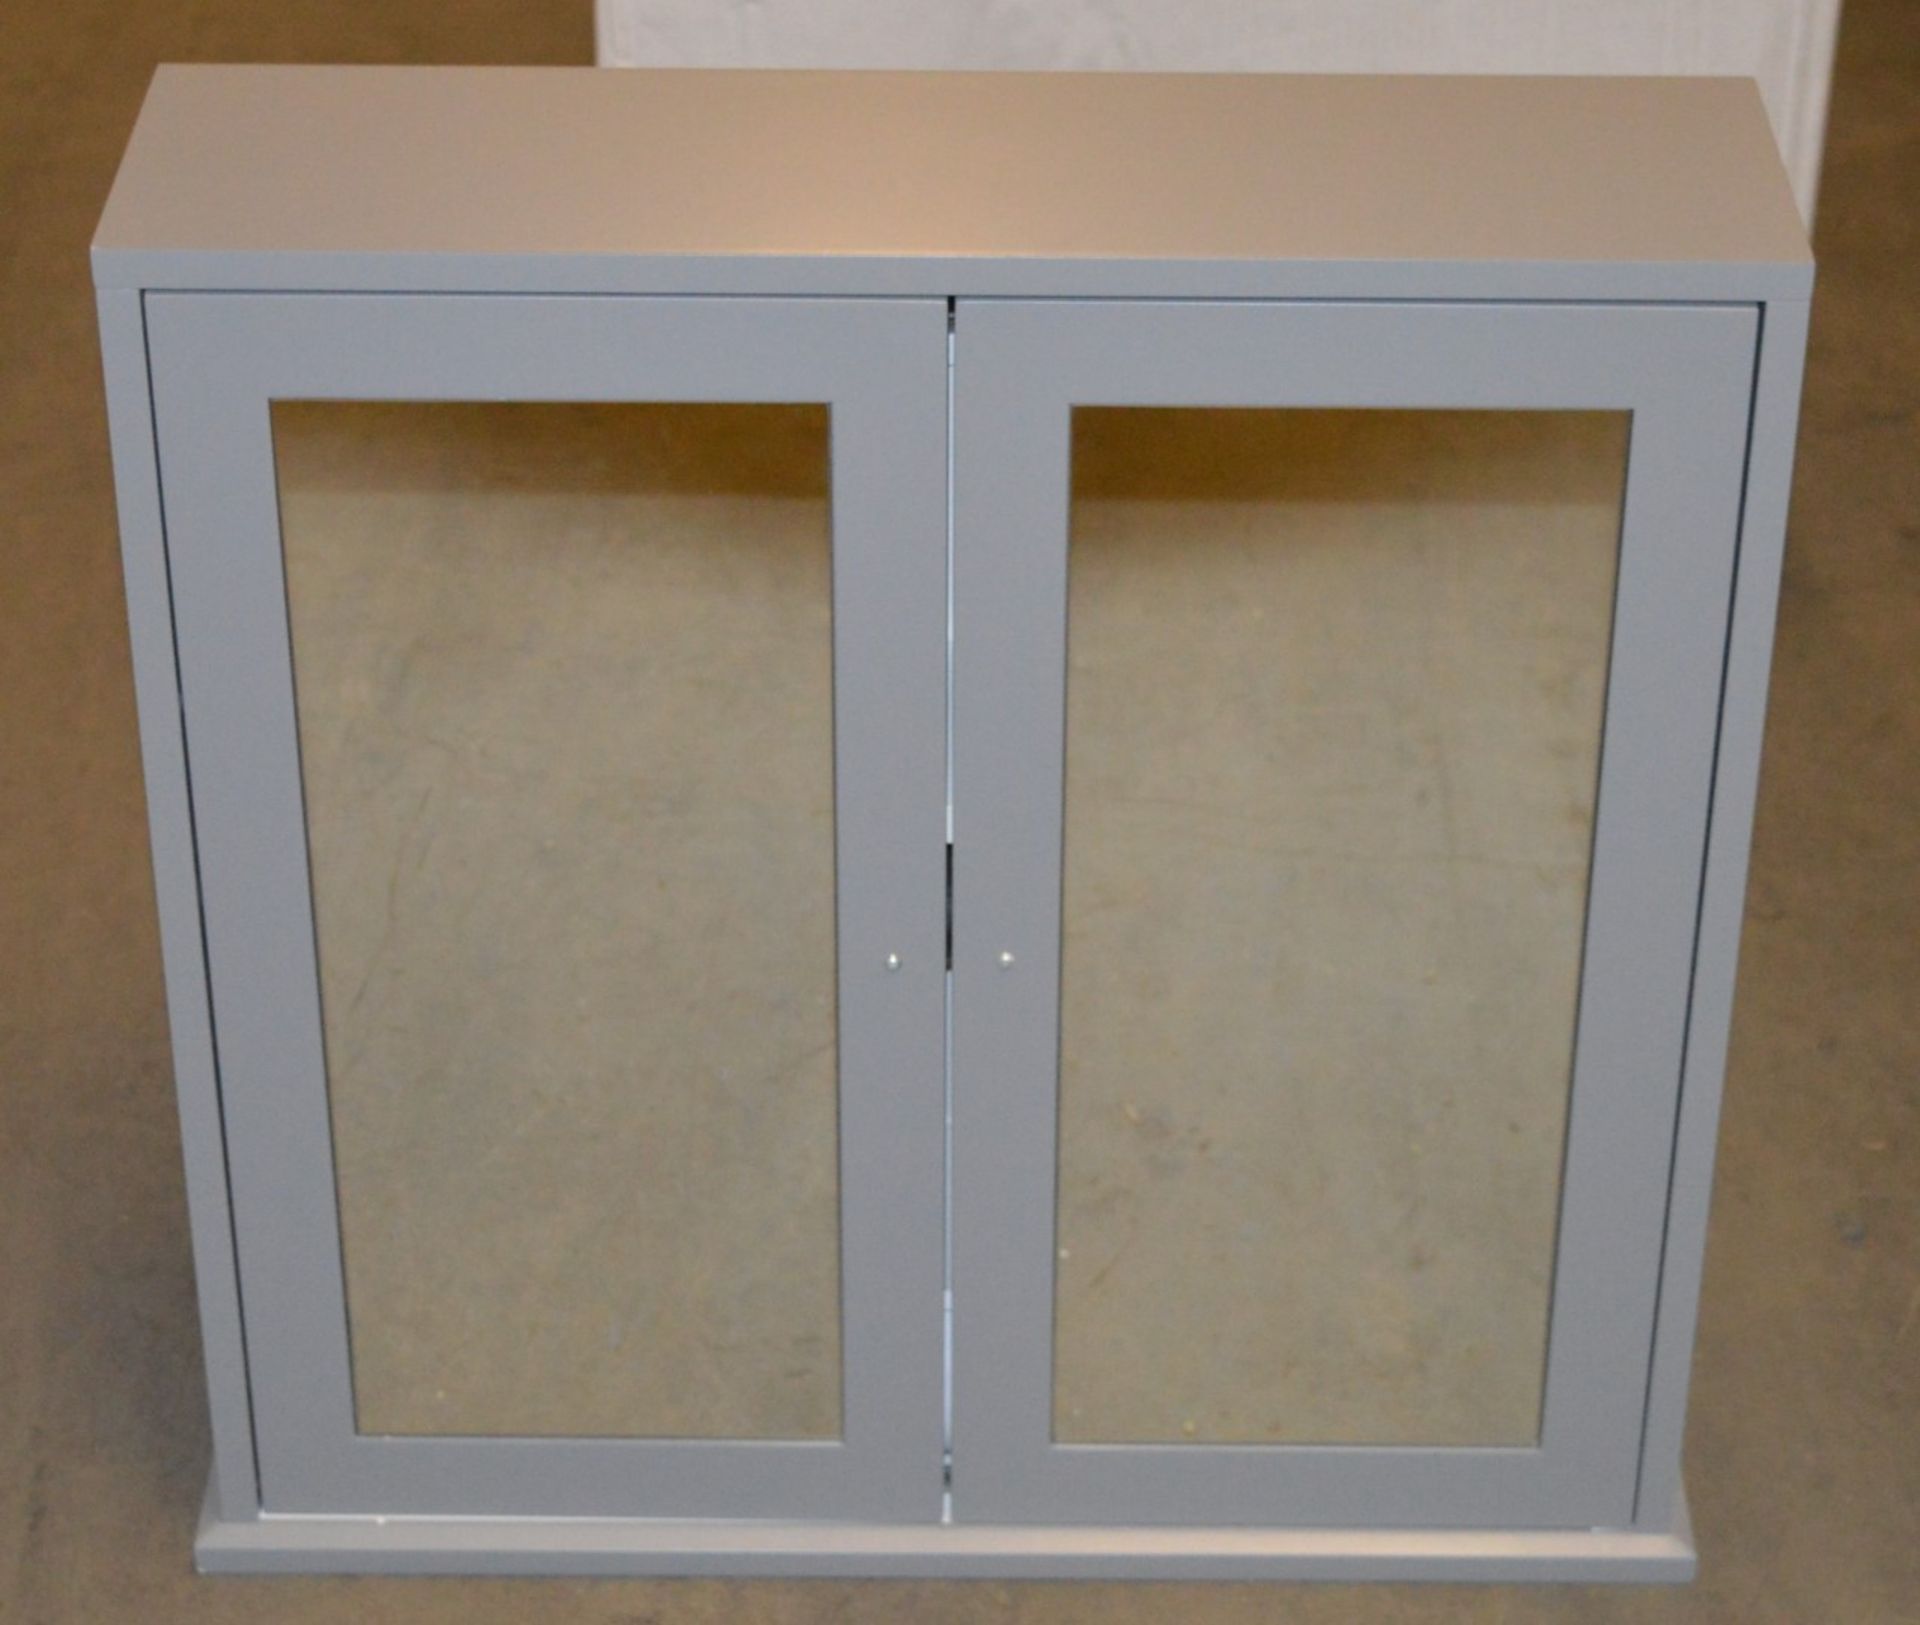 1 x Camberley Wall Hung Mirrored Bathroom Cabinet - H298xW620mm - Contemporary Dove Grey Finish - - Image 4 of 6